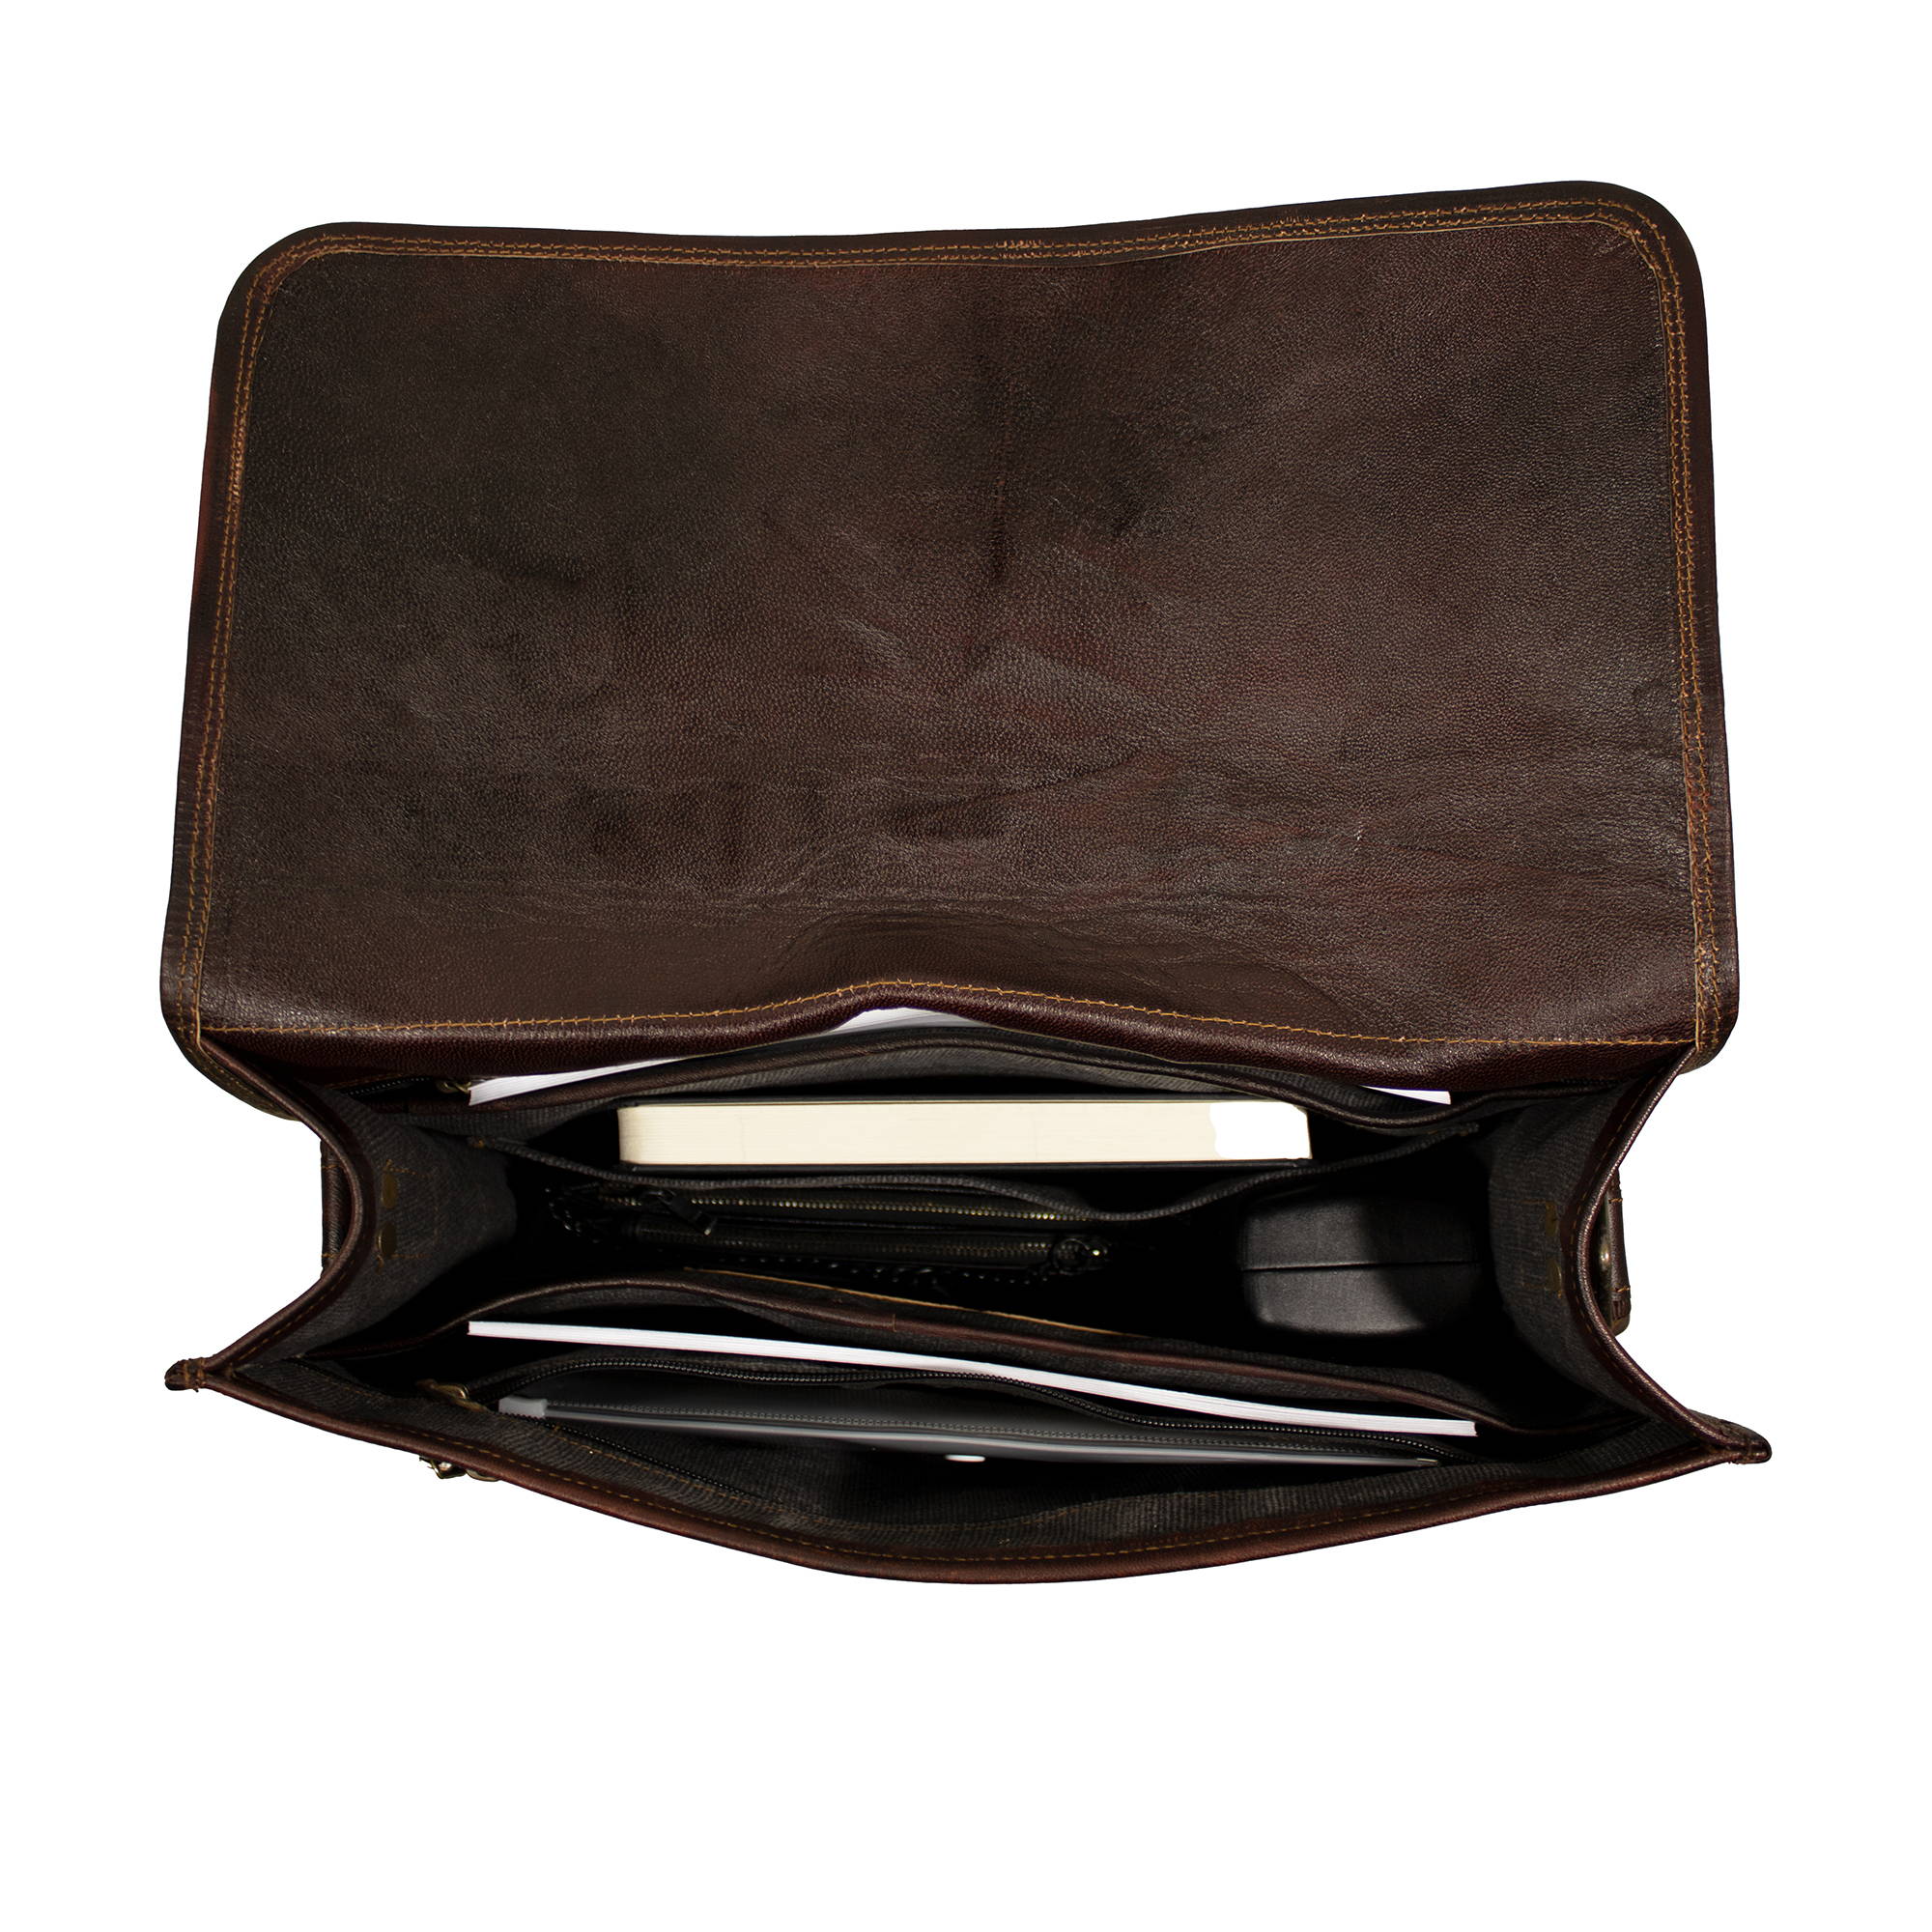 The oldworld leather messenger bag for men the real leather company